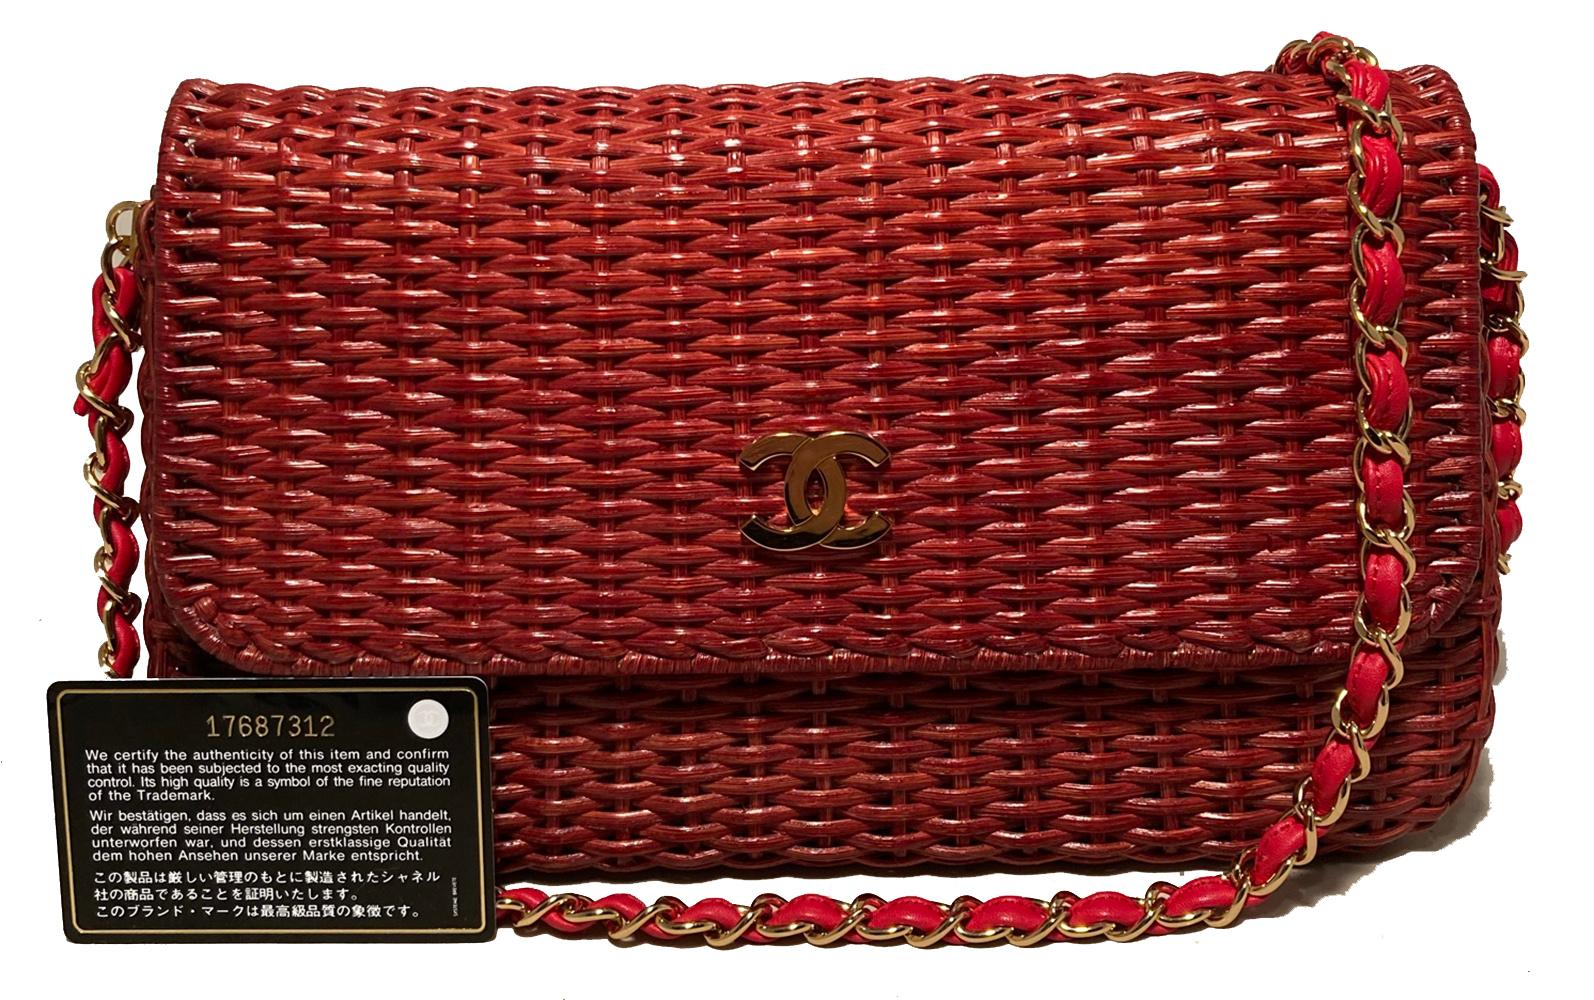 Chanel Red Wicker Classic Flap Shoulder Bag For Sale 4